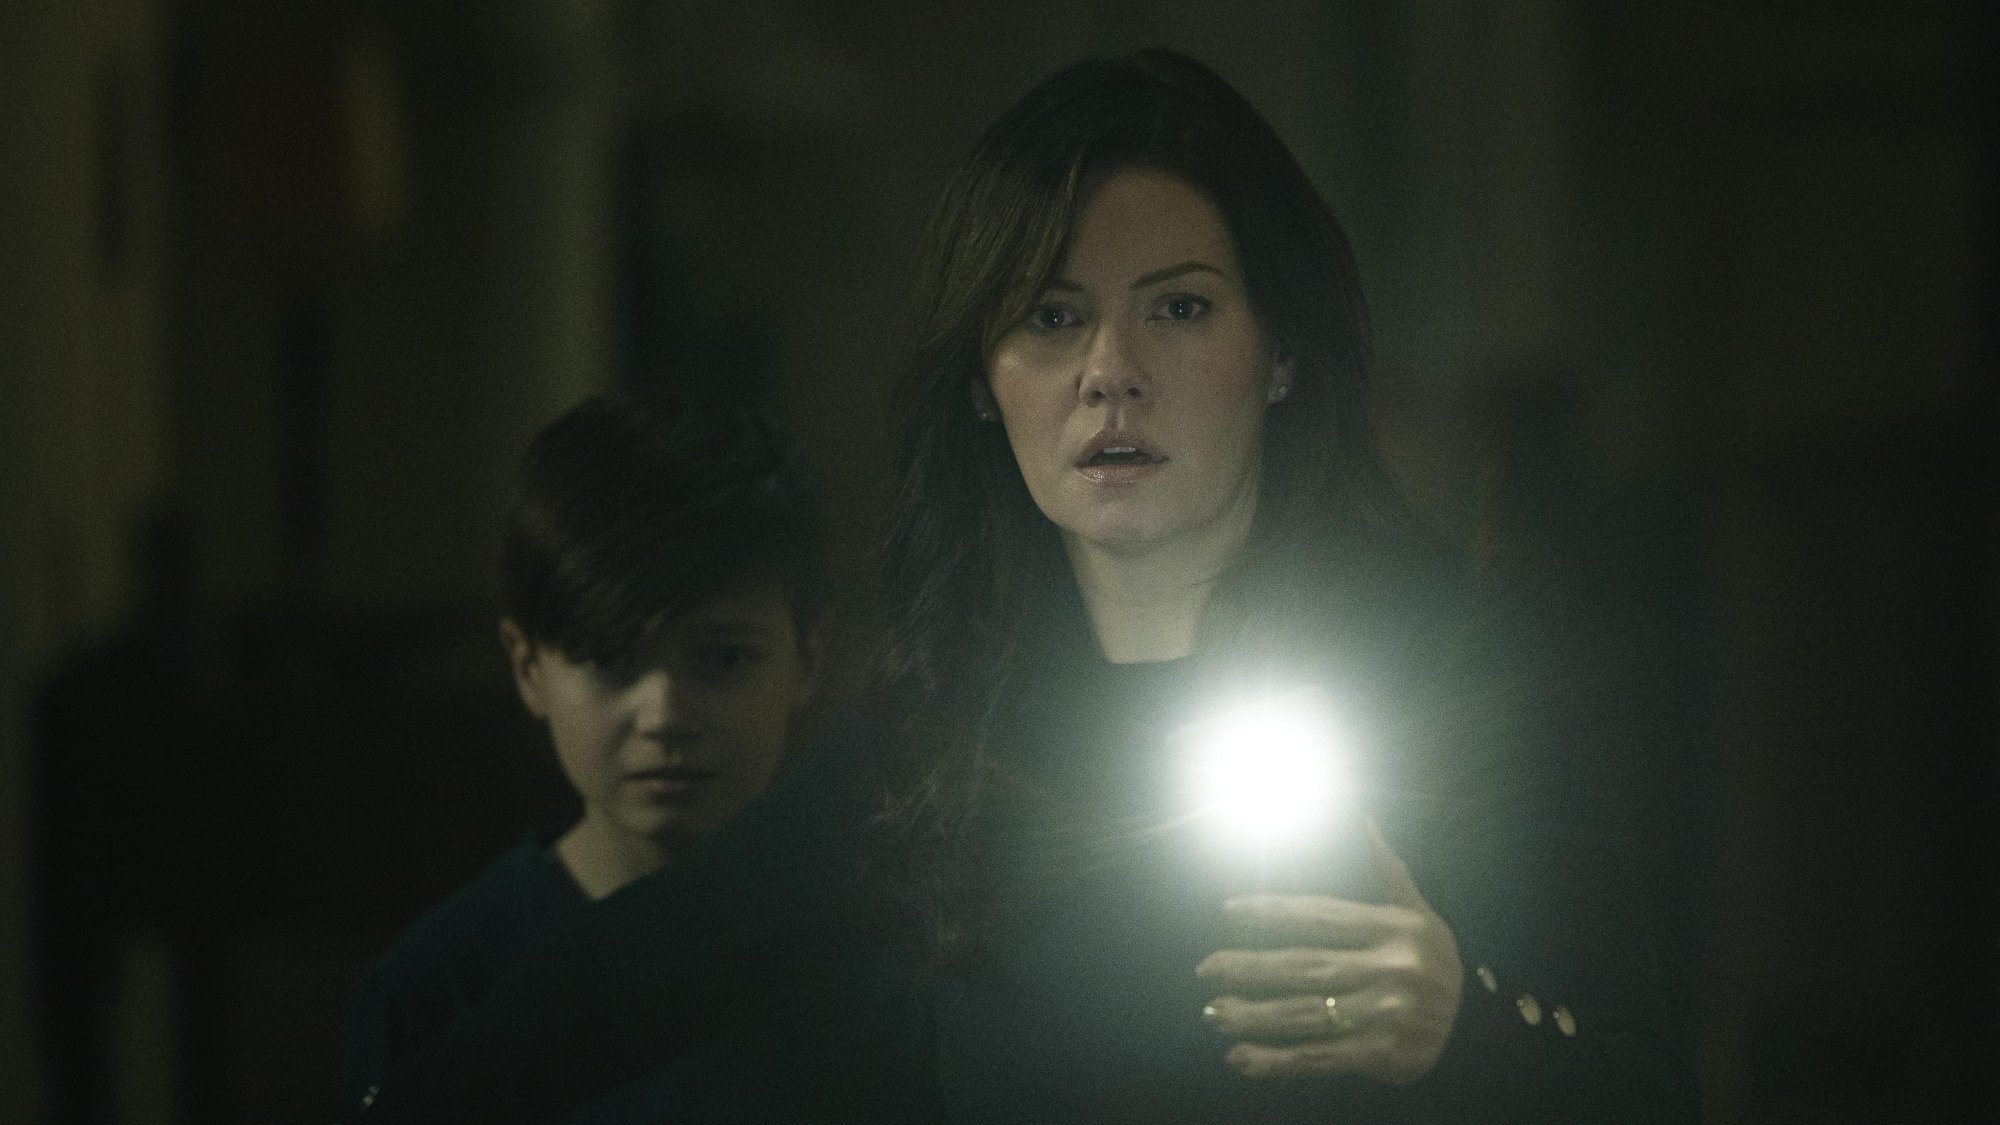 'The Cellar' Dylan Fitzmaurice Brady as Steven and Elisha Cuthbert as Keira looking scared with a phone flashlight on